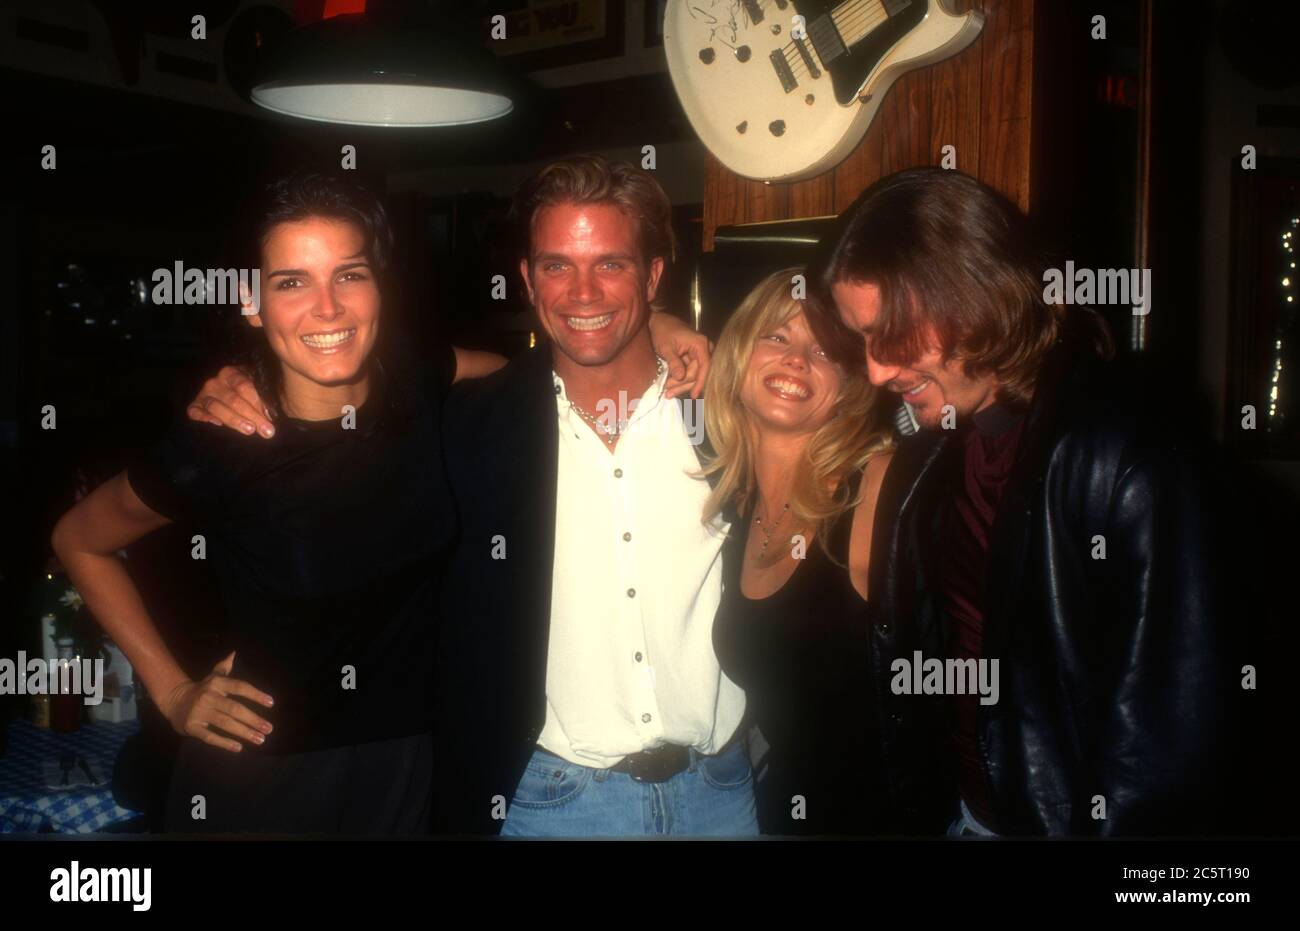 Los Angeles, California, USA 4th December 1995 (L-R) Actress Angie Harmon, actor David Chokachi, actress Donna D'Errico and actor Jaason Simmons attend event at Hard Rock Cafe on December 4, 1995 in Los Angeles, California, USA. Photo by Barry King/Alamy Stock Photo Stock Photo